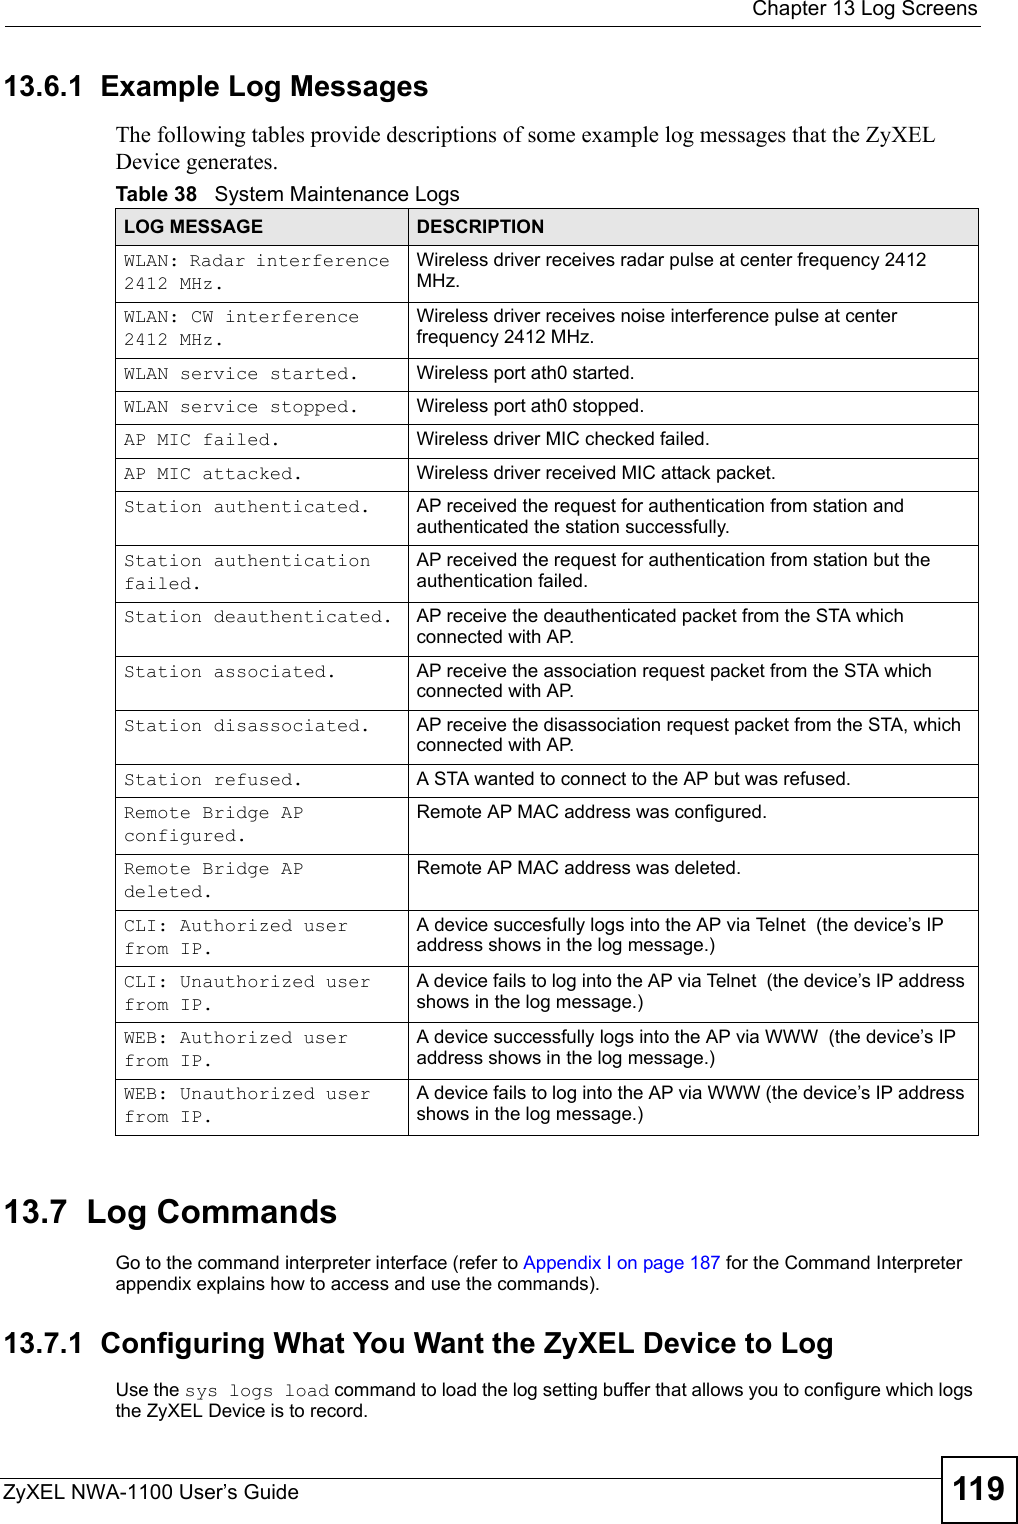  Chapter 13 Log ScreensZyXEL NWA-1100 User’s Guide 11913.6.1  Example Log MessagesThe following tables provide descriptions of some example log messages that the ZyXEL Device generates.13.7  Log CommandsGo to the command interpreter interface (refer to Appendix I on page 187 for the Command Interpreter appendix explains how to access and use the commands).13.7.1  Configuring What You Want the ZyXEL Device to LogUse the sys logs load command to load the log setting buffer that allows you to configure which logs the ZyXEL Device is to record.Table 38   System Maintenance LogsLOG MESSAGE DESCRIPTIONWLAN: Radar interference 2412 MHz.Wireless driver receives radar pulse at center frequency 2412 MHz.WLAN: CW interference 2412 MHz.Wireless driver receives noise interference pulse at center frequency 2412 MHz.WLAN service started. Wireless port ath0 started.WLAN service stopped. Wireless port ath0 stopped.AP MIC failed. Wireless driver MIC checked failed.AP MIC attacked. Wireless driver received MIC attack packet.Station authenticated. AP received the request for authentication from station and authenticated the station successfully.Station authentication failed.AP received the request for authentication from station but the authentication failed.Station deauthenticated. AP receive the deauthenticated packet from the STA which connected with AP.Station associated. AP receive the association request packet from the STA which connected with AP.Station disassociated. AP receive the disassociation request packet from the STA, which connected with AP.Station refused. A STA wanted to connect to the AP but was refused.Remote Bridge AP configured.Remote AP MAC address was configured.Remote Bridge AP deleted.Remote AP MAC address was deleted.CLI: Authorized user from IP.A device succesfully logs into the AP via Telnet  (the device’s IP address shows in the log message.)CLI: Unauthorized user from IP.A device fails to log into the AP via Telnet  (the device’s IP address shows in the log message.)WEB: Authorized user from IP.A device successfully logs into the AP via WWW  (the device’s IP address shows in the log message.)WEB: Unauthorized user from IP.A device fails to log into the AP via WWW (the device’s IP address shows in the log message.)